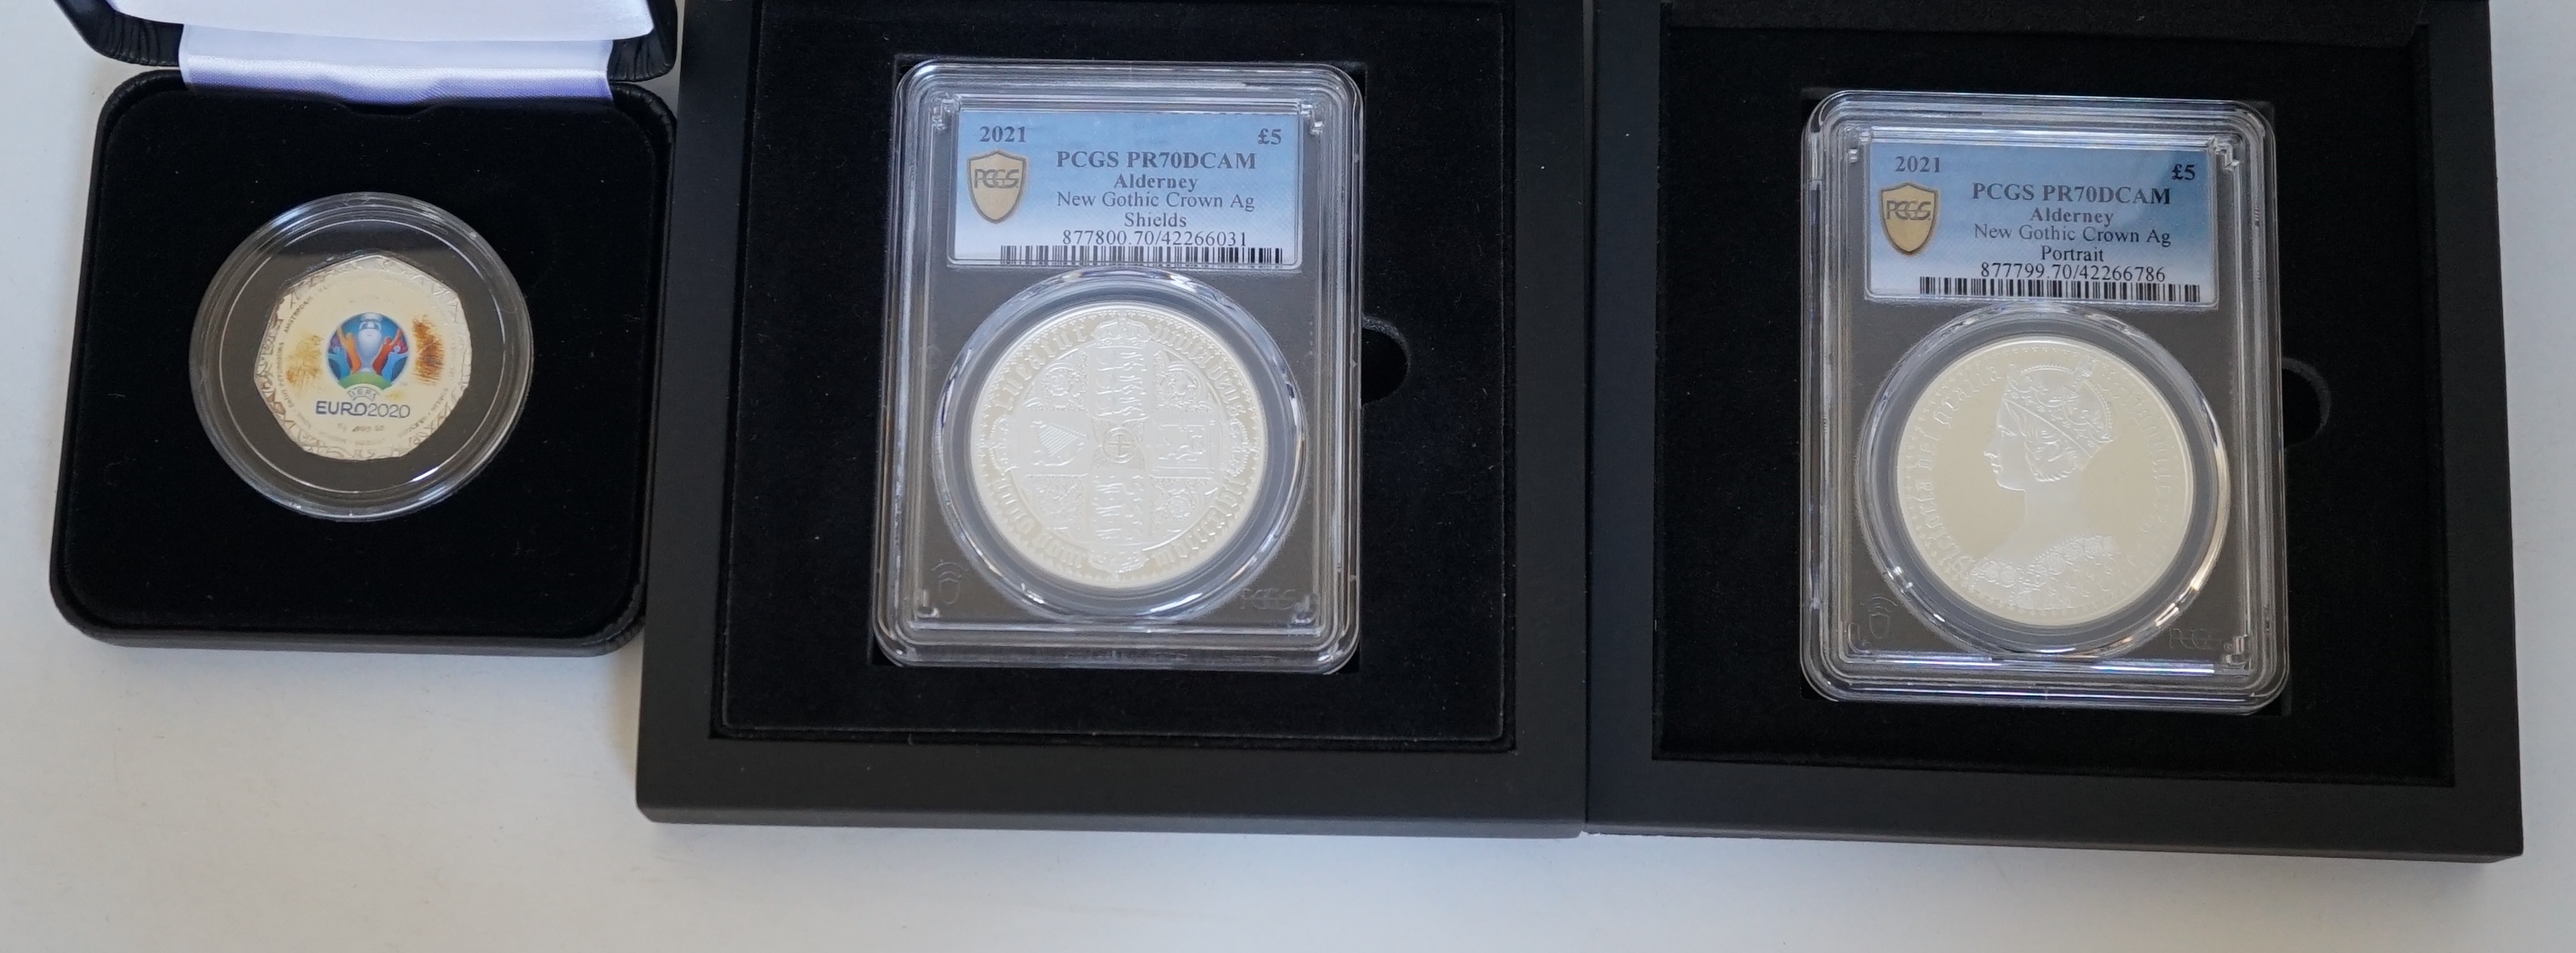 Elizabeth II proof silver coins, two 2021 Alderney QEII New Gothic crown proof silver £5 coins, Queen Victoria portrait and Gothic cruciform Shields reverse, both PCGS slabbed and graded PR70DCAM and a UEFA Euro 2020 Sol